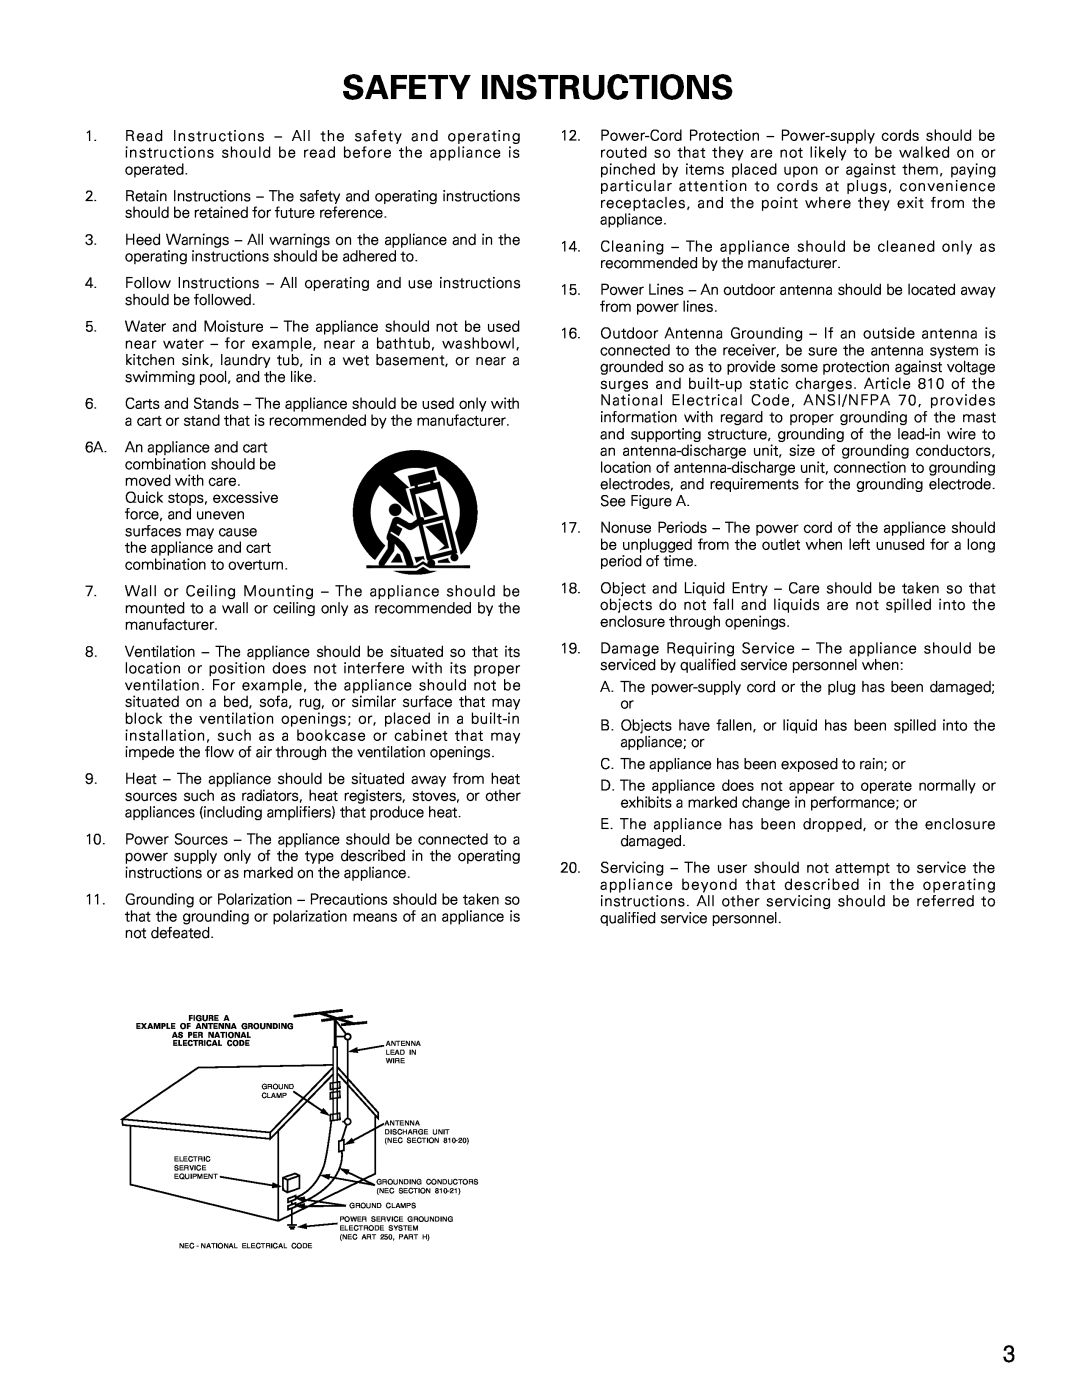 Denon DRM-555 manual Safety Instructions 